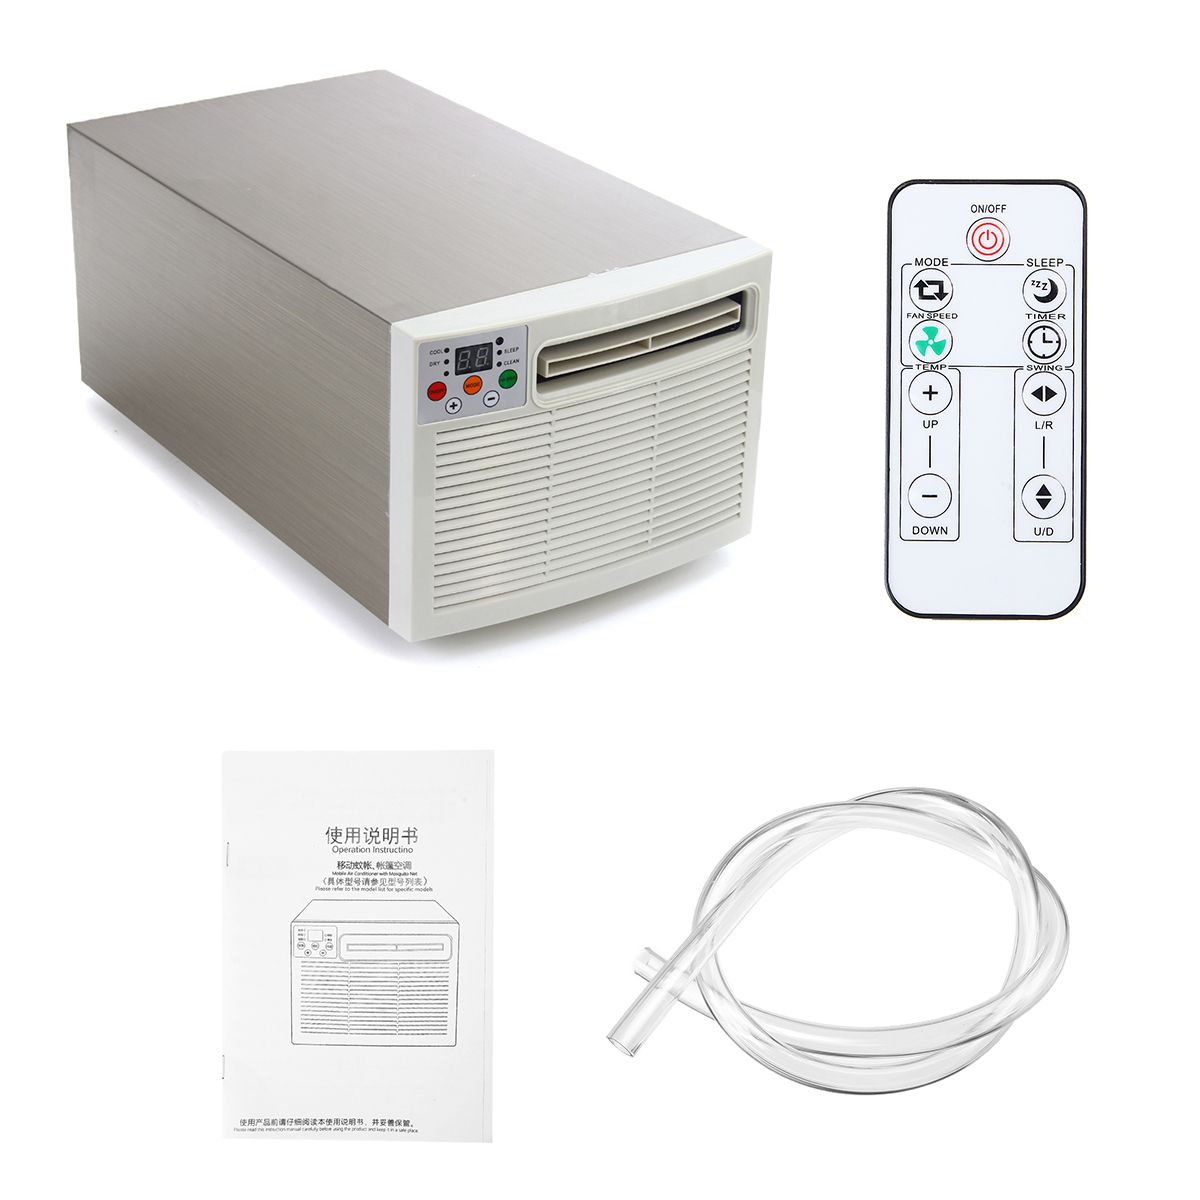 220x558x295mm-220V-Portable-Heater-Air-Conditioner-Window-Air-Conditioner-Multi-functional-Cooling-H-1559939